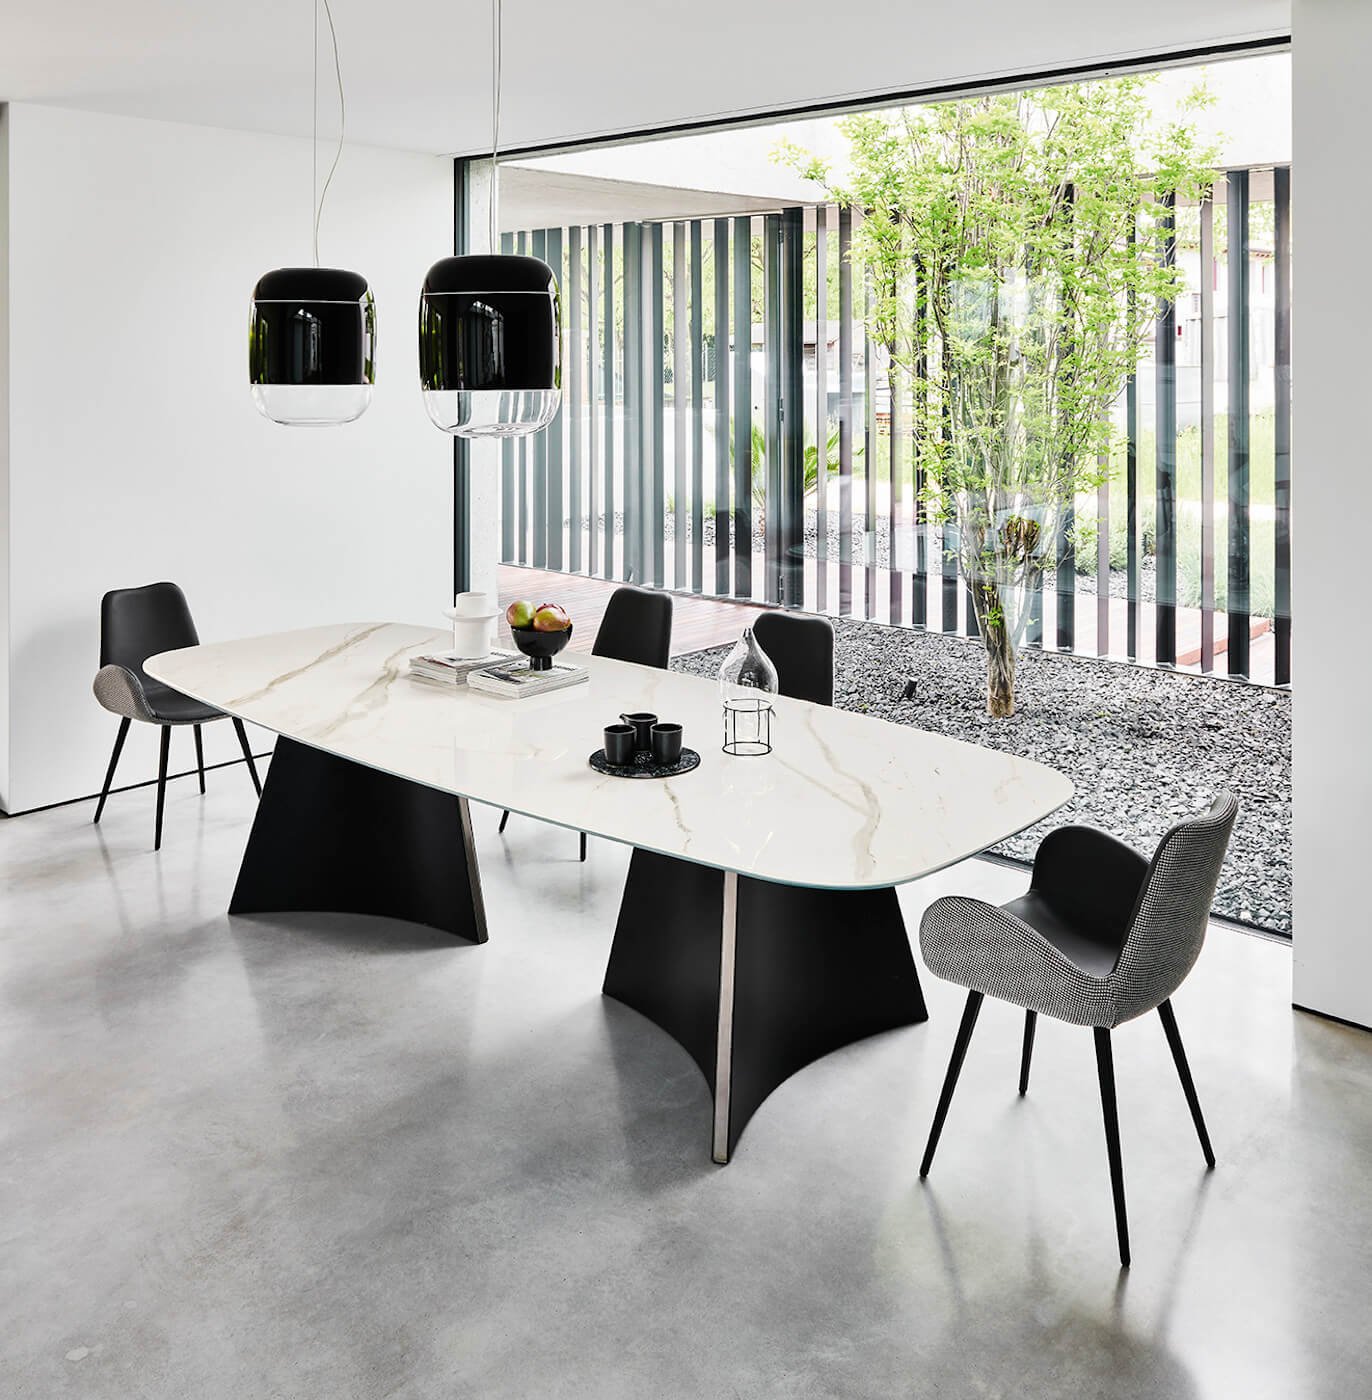 Concave Botte Dining Table from Midj, designed by Nicola Bonriposi